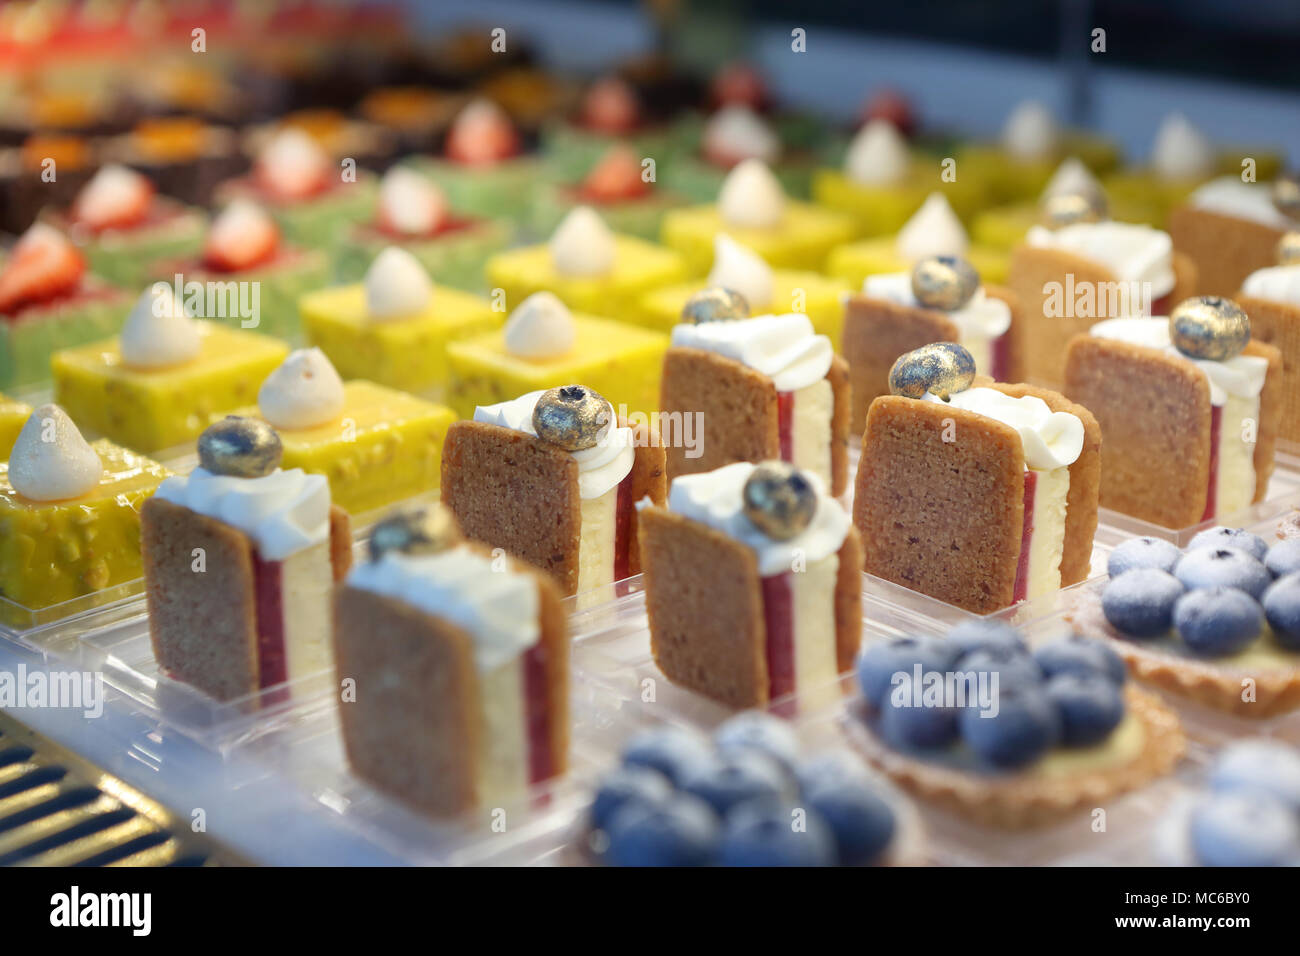 Catering set cookies in pastry shop Stock Photo